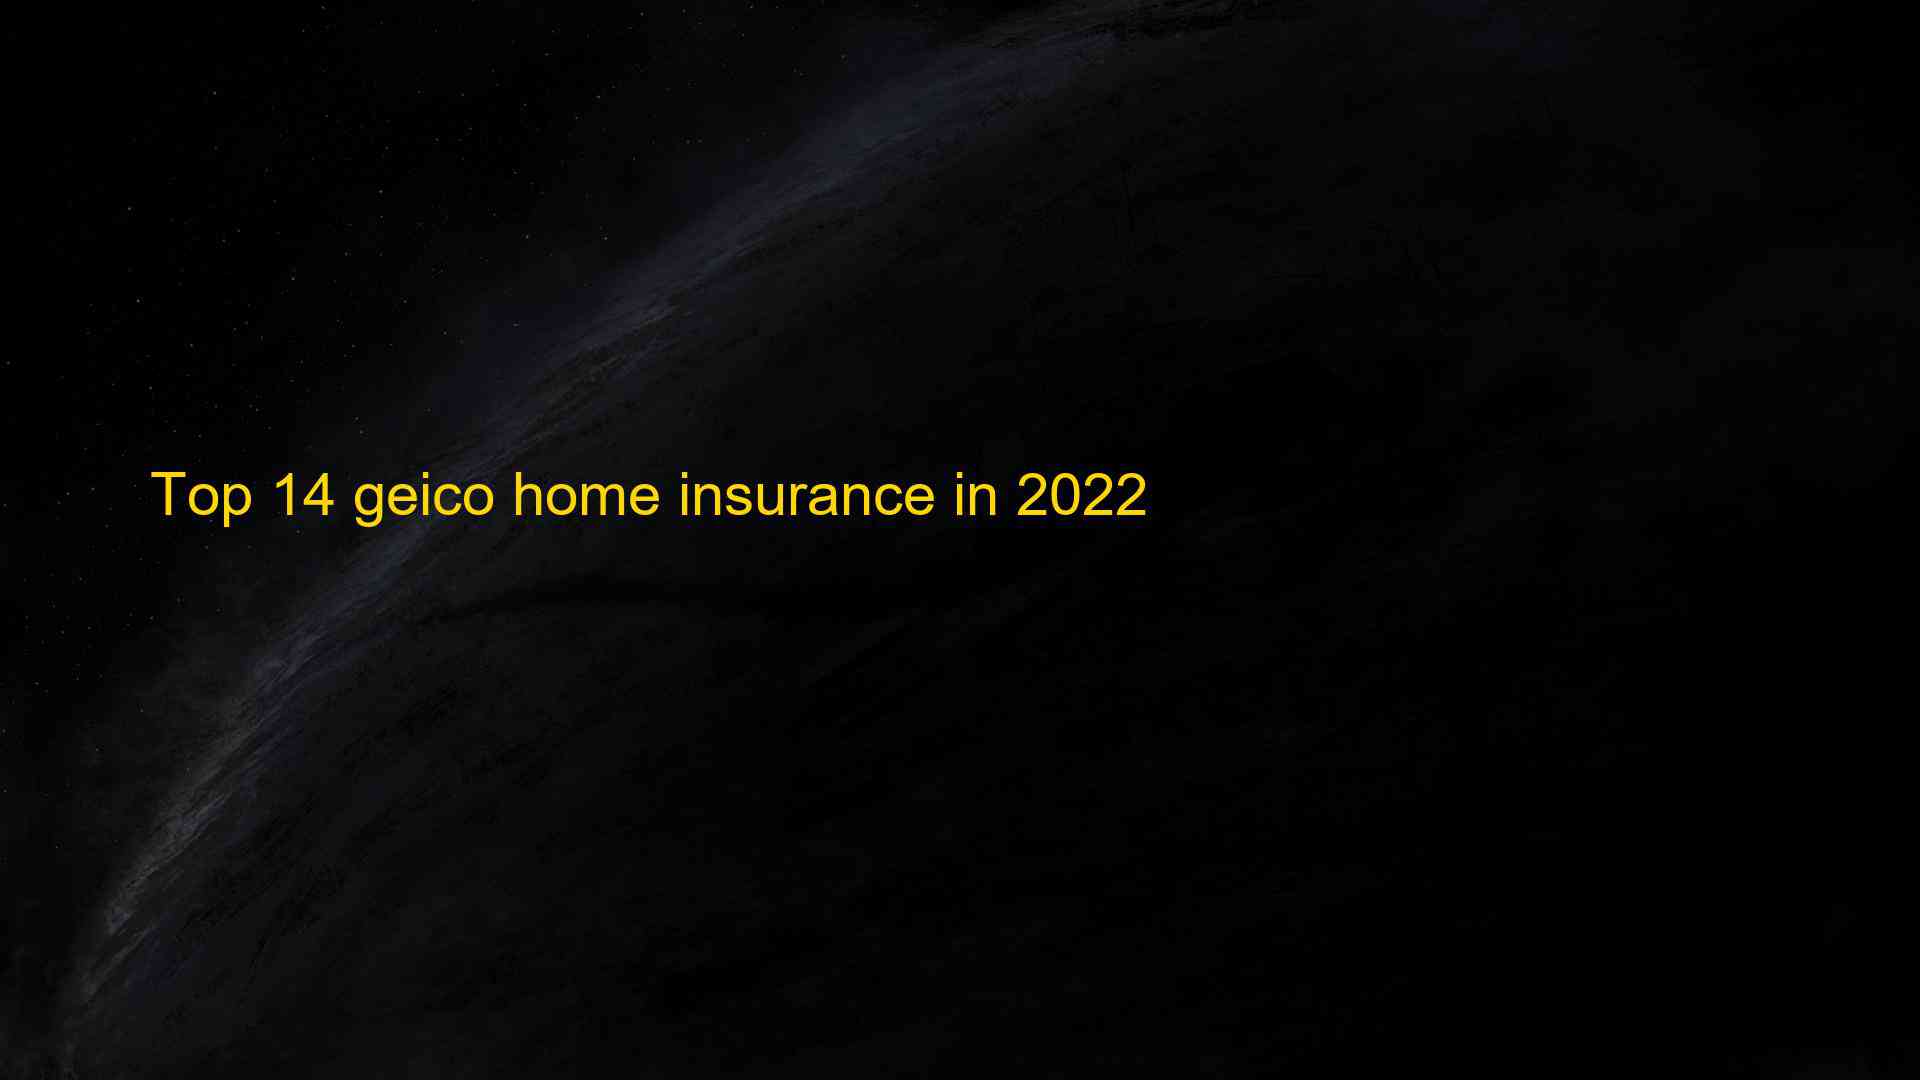 Top 14 geico home insurance in 2022 1660481611